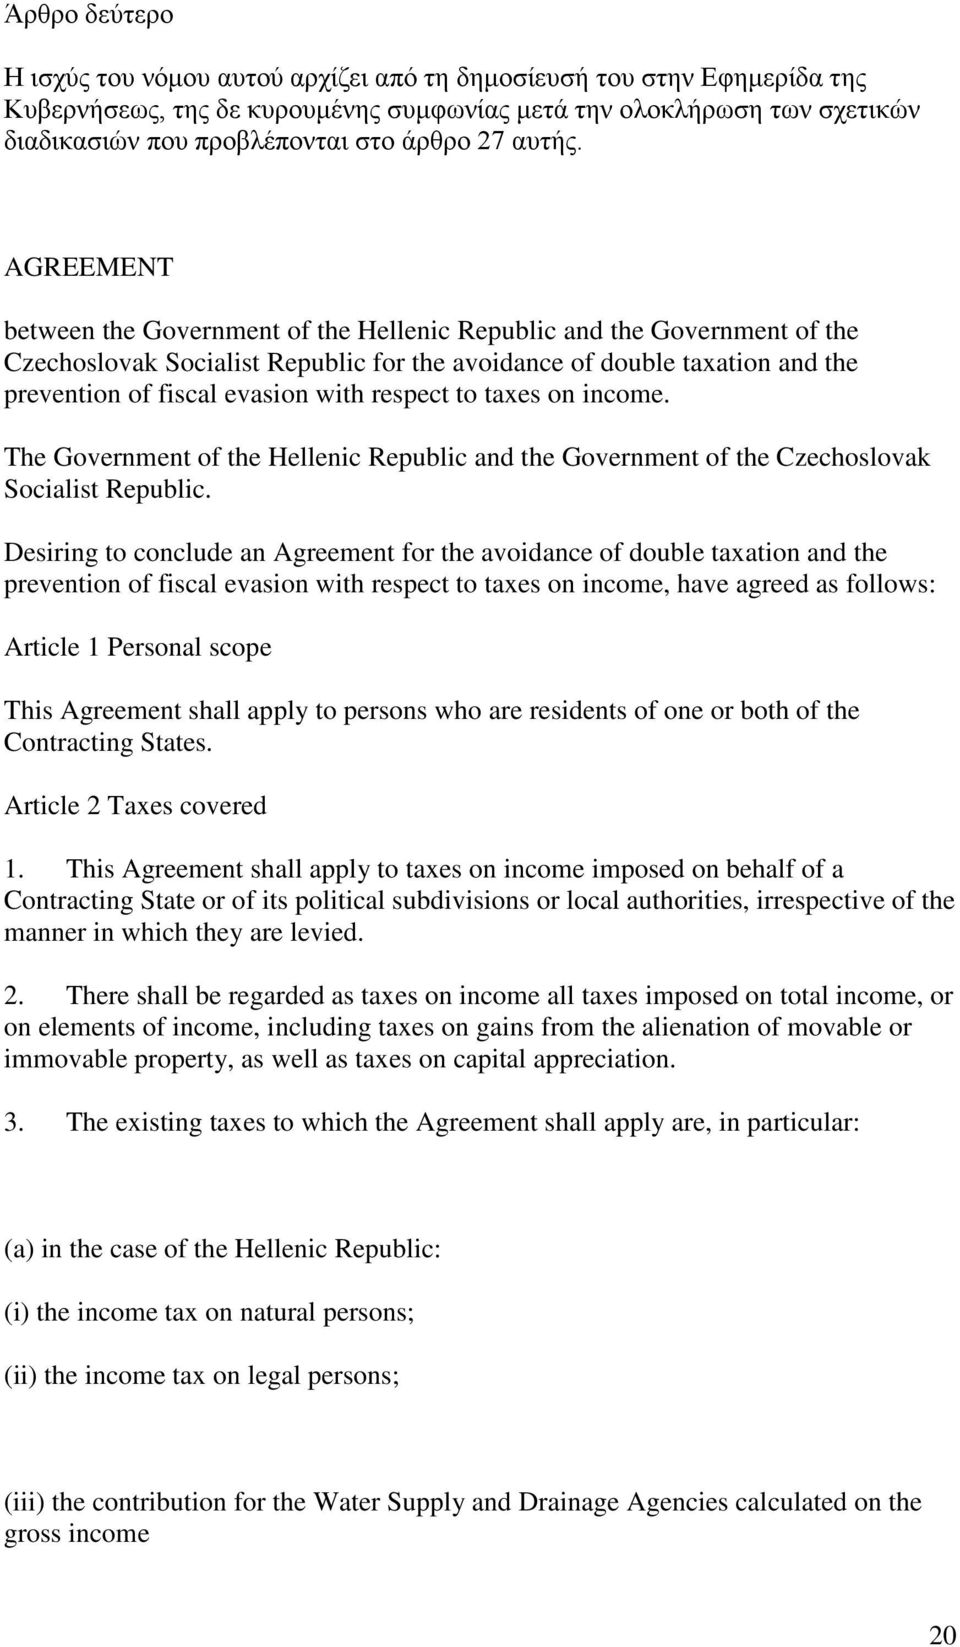 AGREEMENT between the Government of the Hellenic Republic and the Government of the Czechoslovak Socialist Republic for the avoidance of double taxation and the prevention of fiscal evasion with